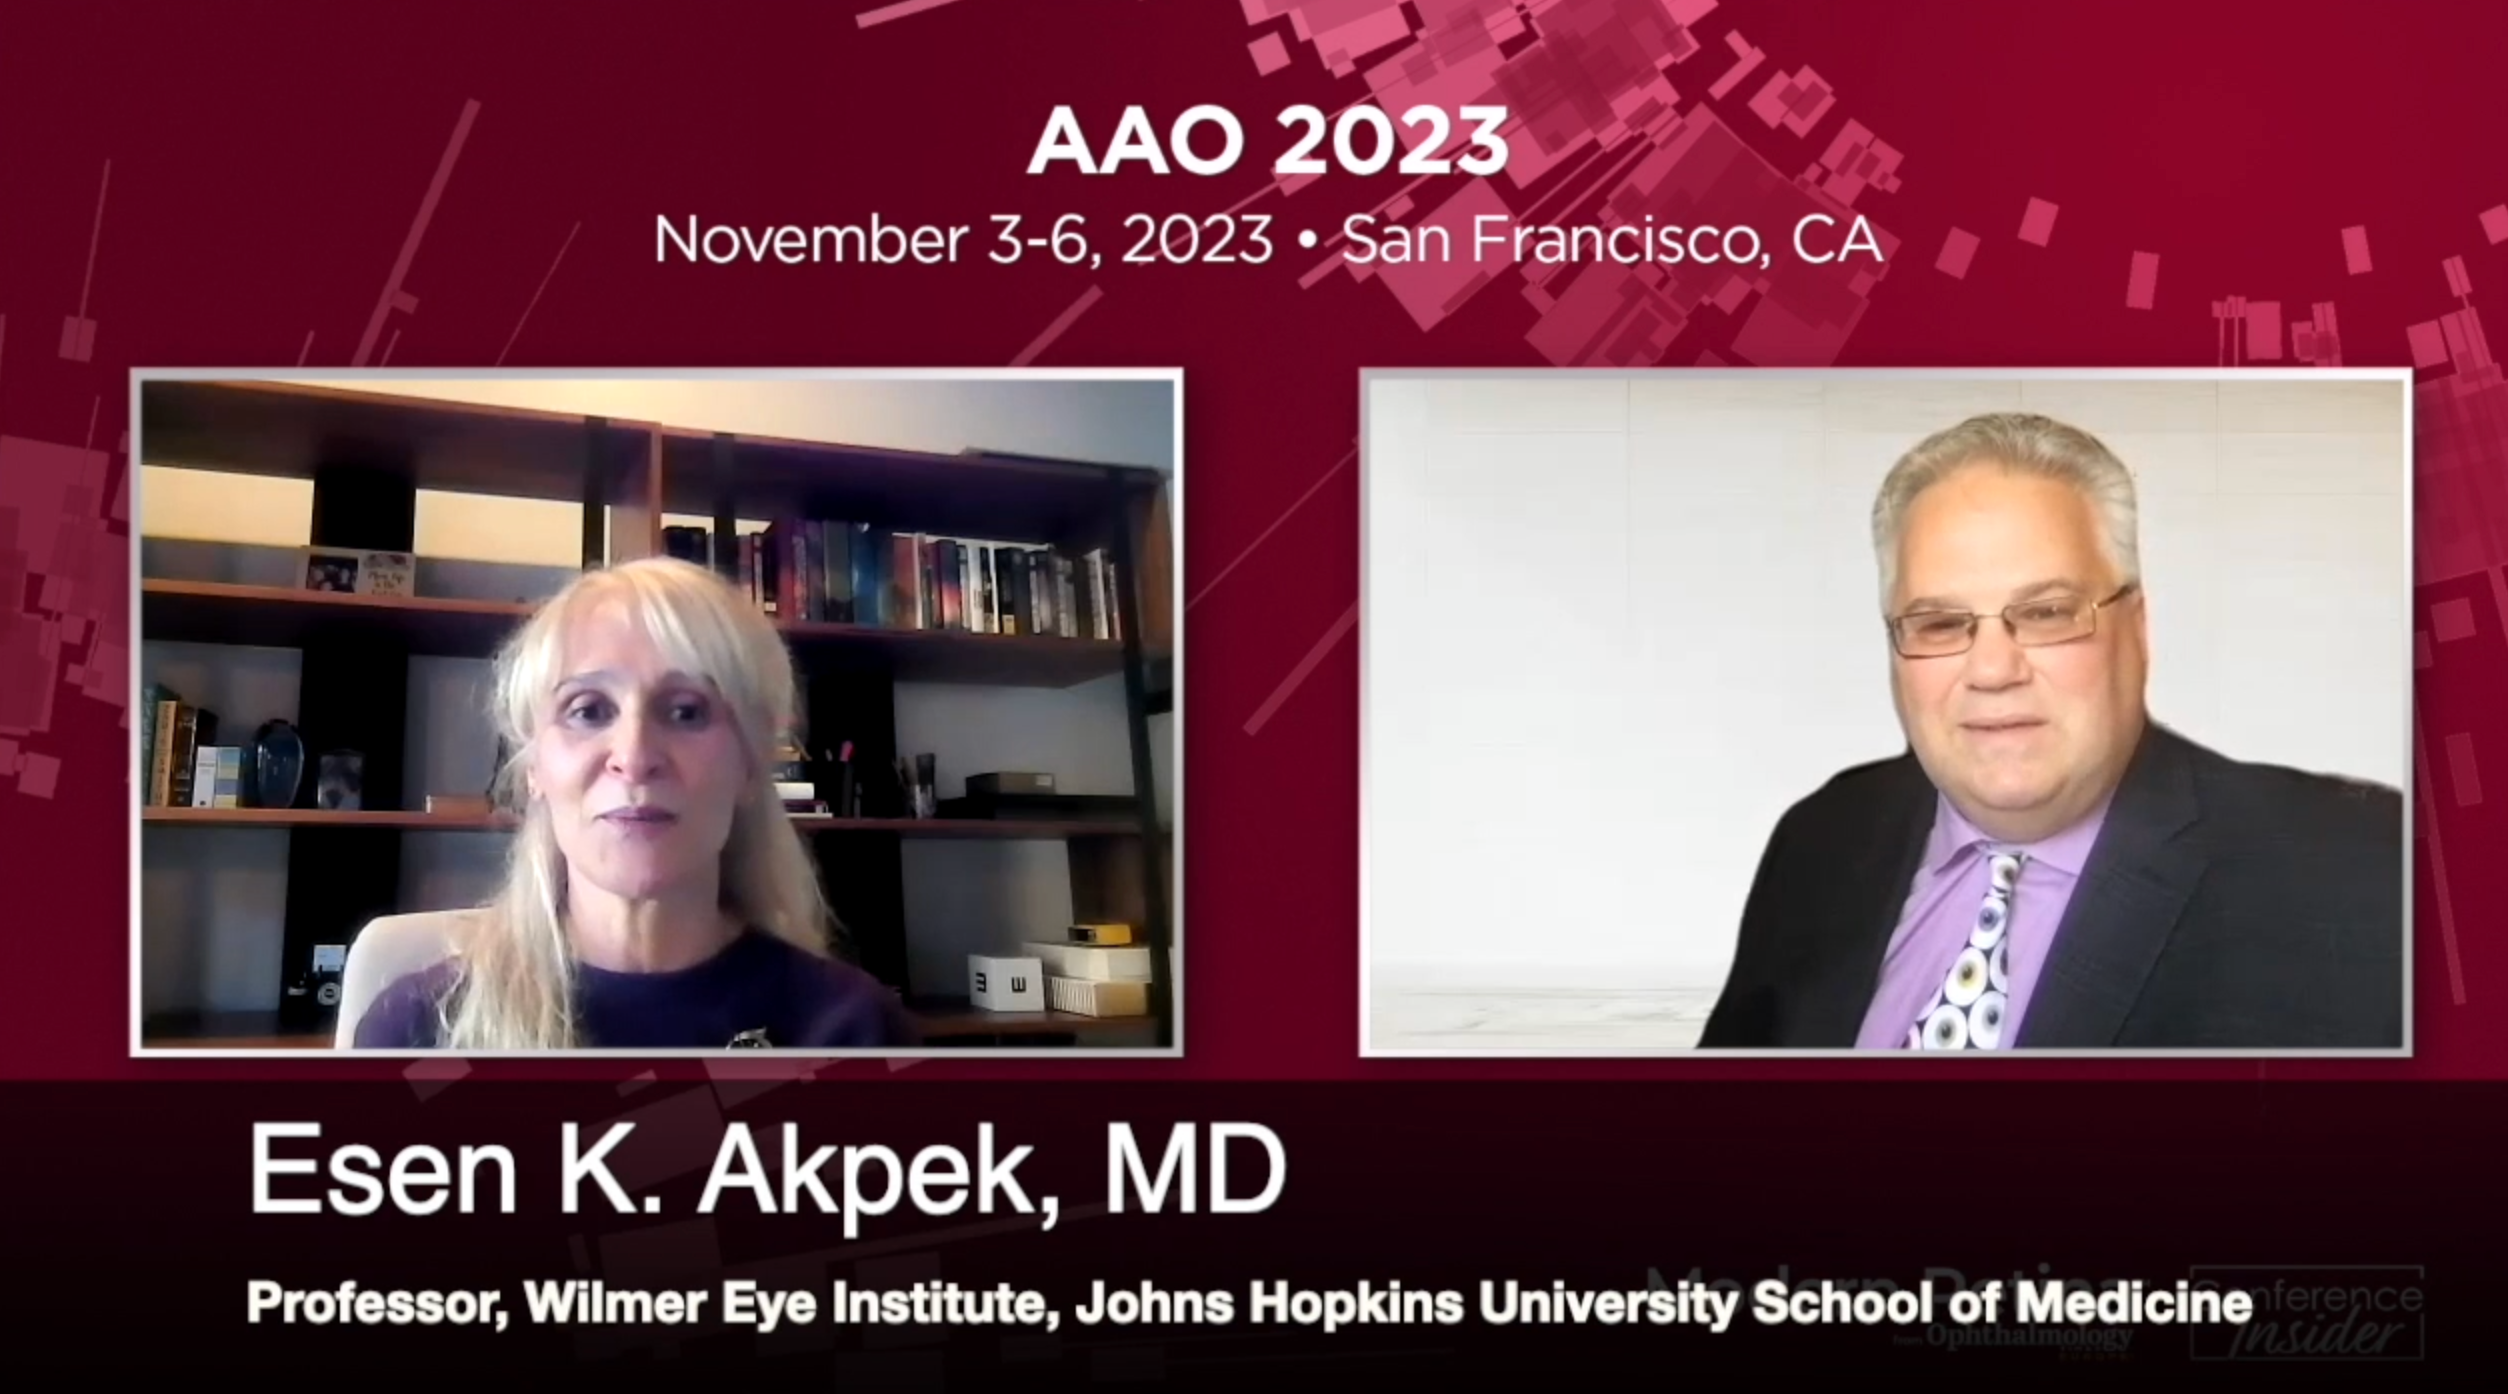 Esen K. Akpek, MD, Professor at the Wilmer Eye Institute, Johns Hopkins University School of Medicine, converses via zoom with David Hutton of Ophthalmology Times